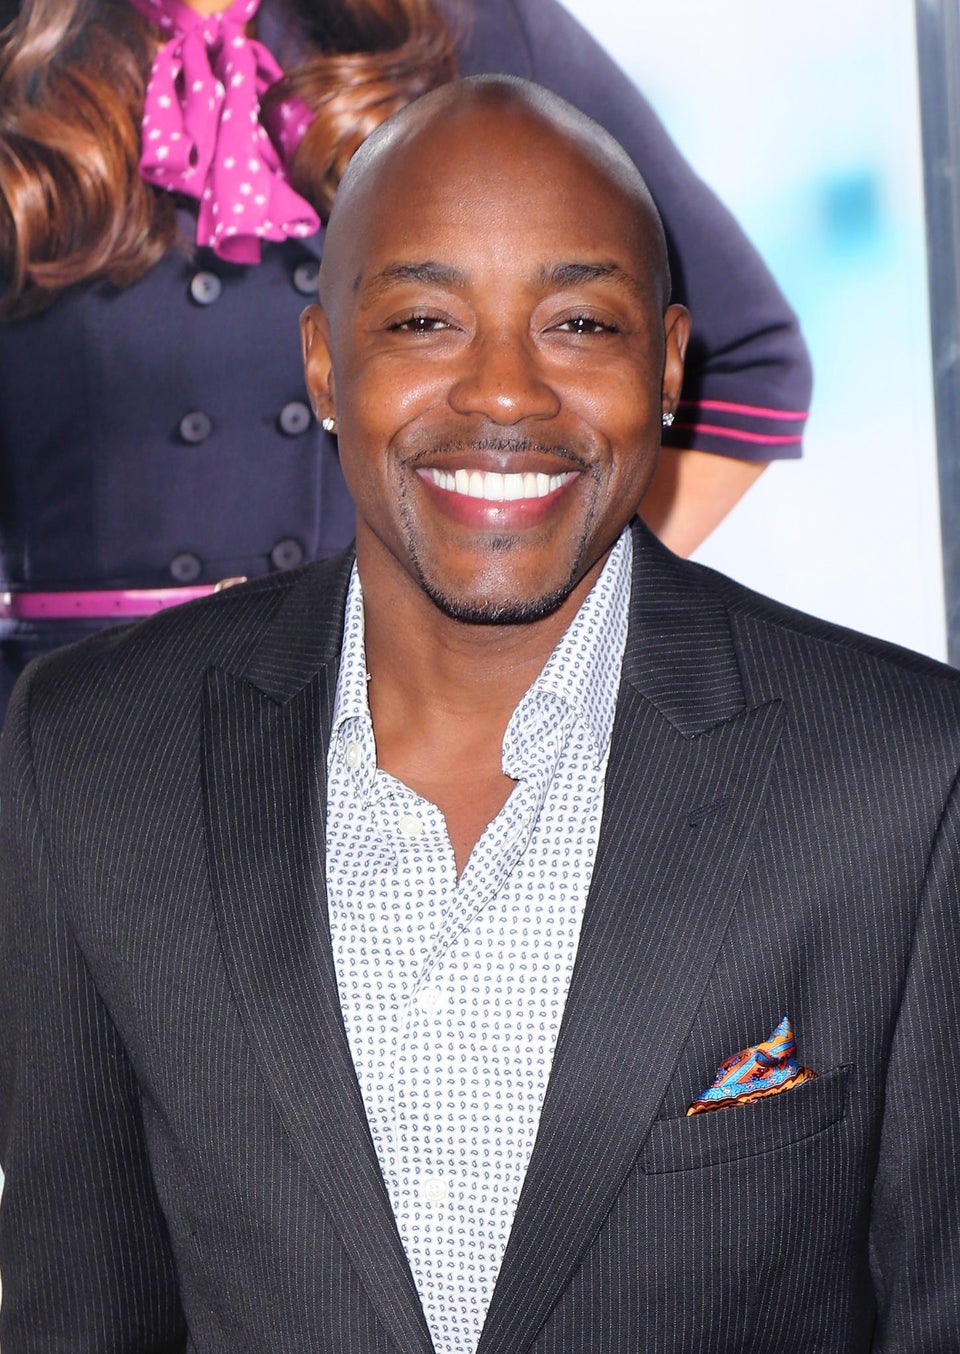 Malcom D. Lee and Will Packer Team Up for New Movie ‘Girls Trip’